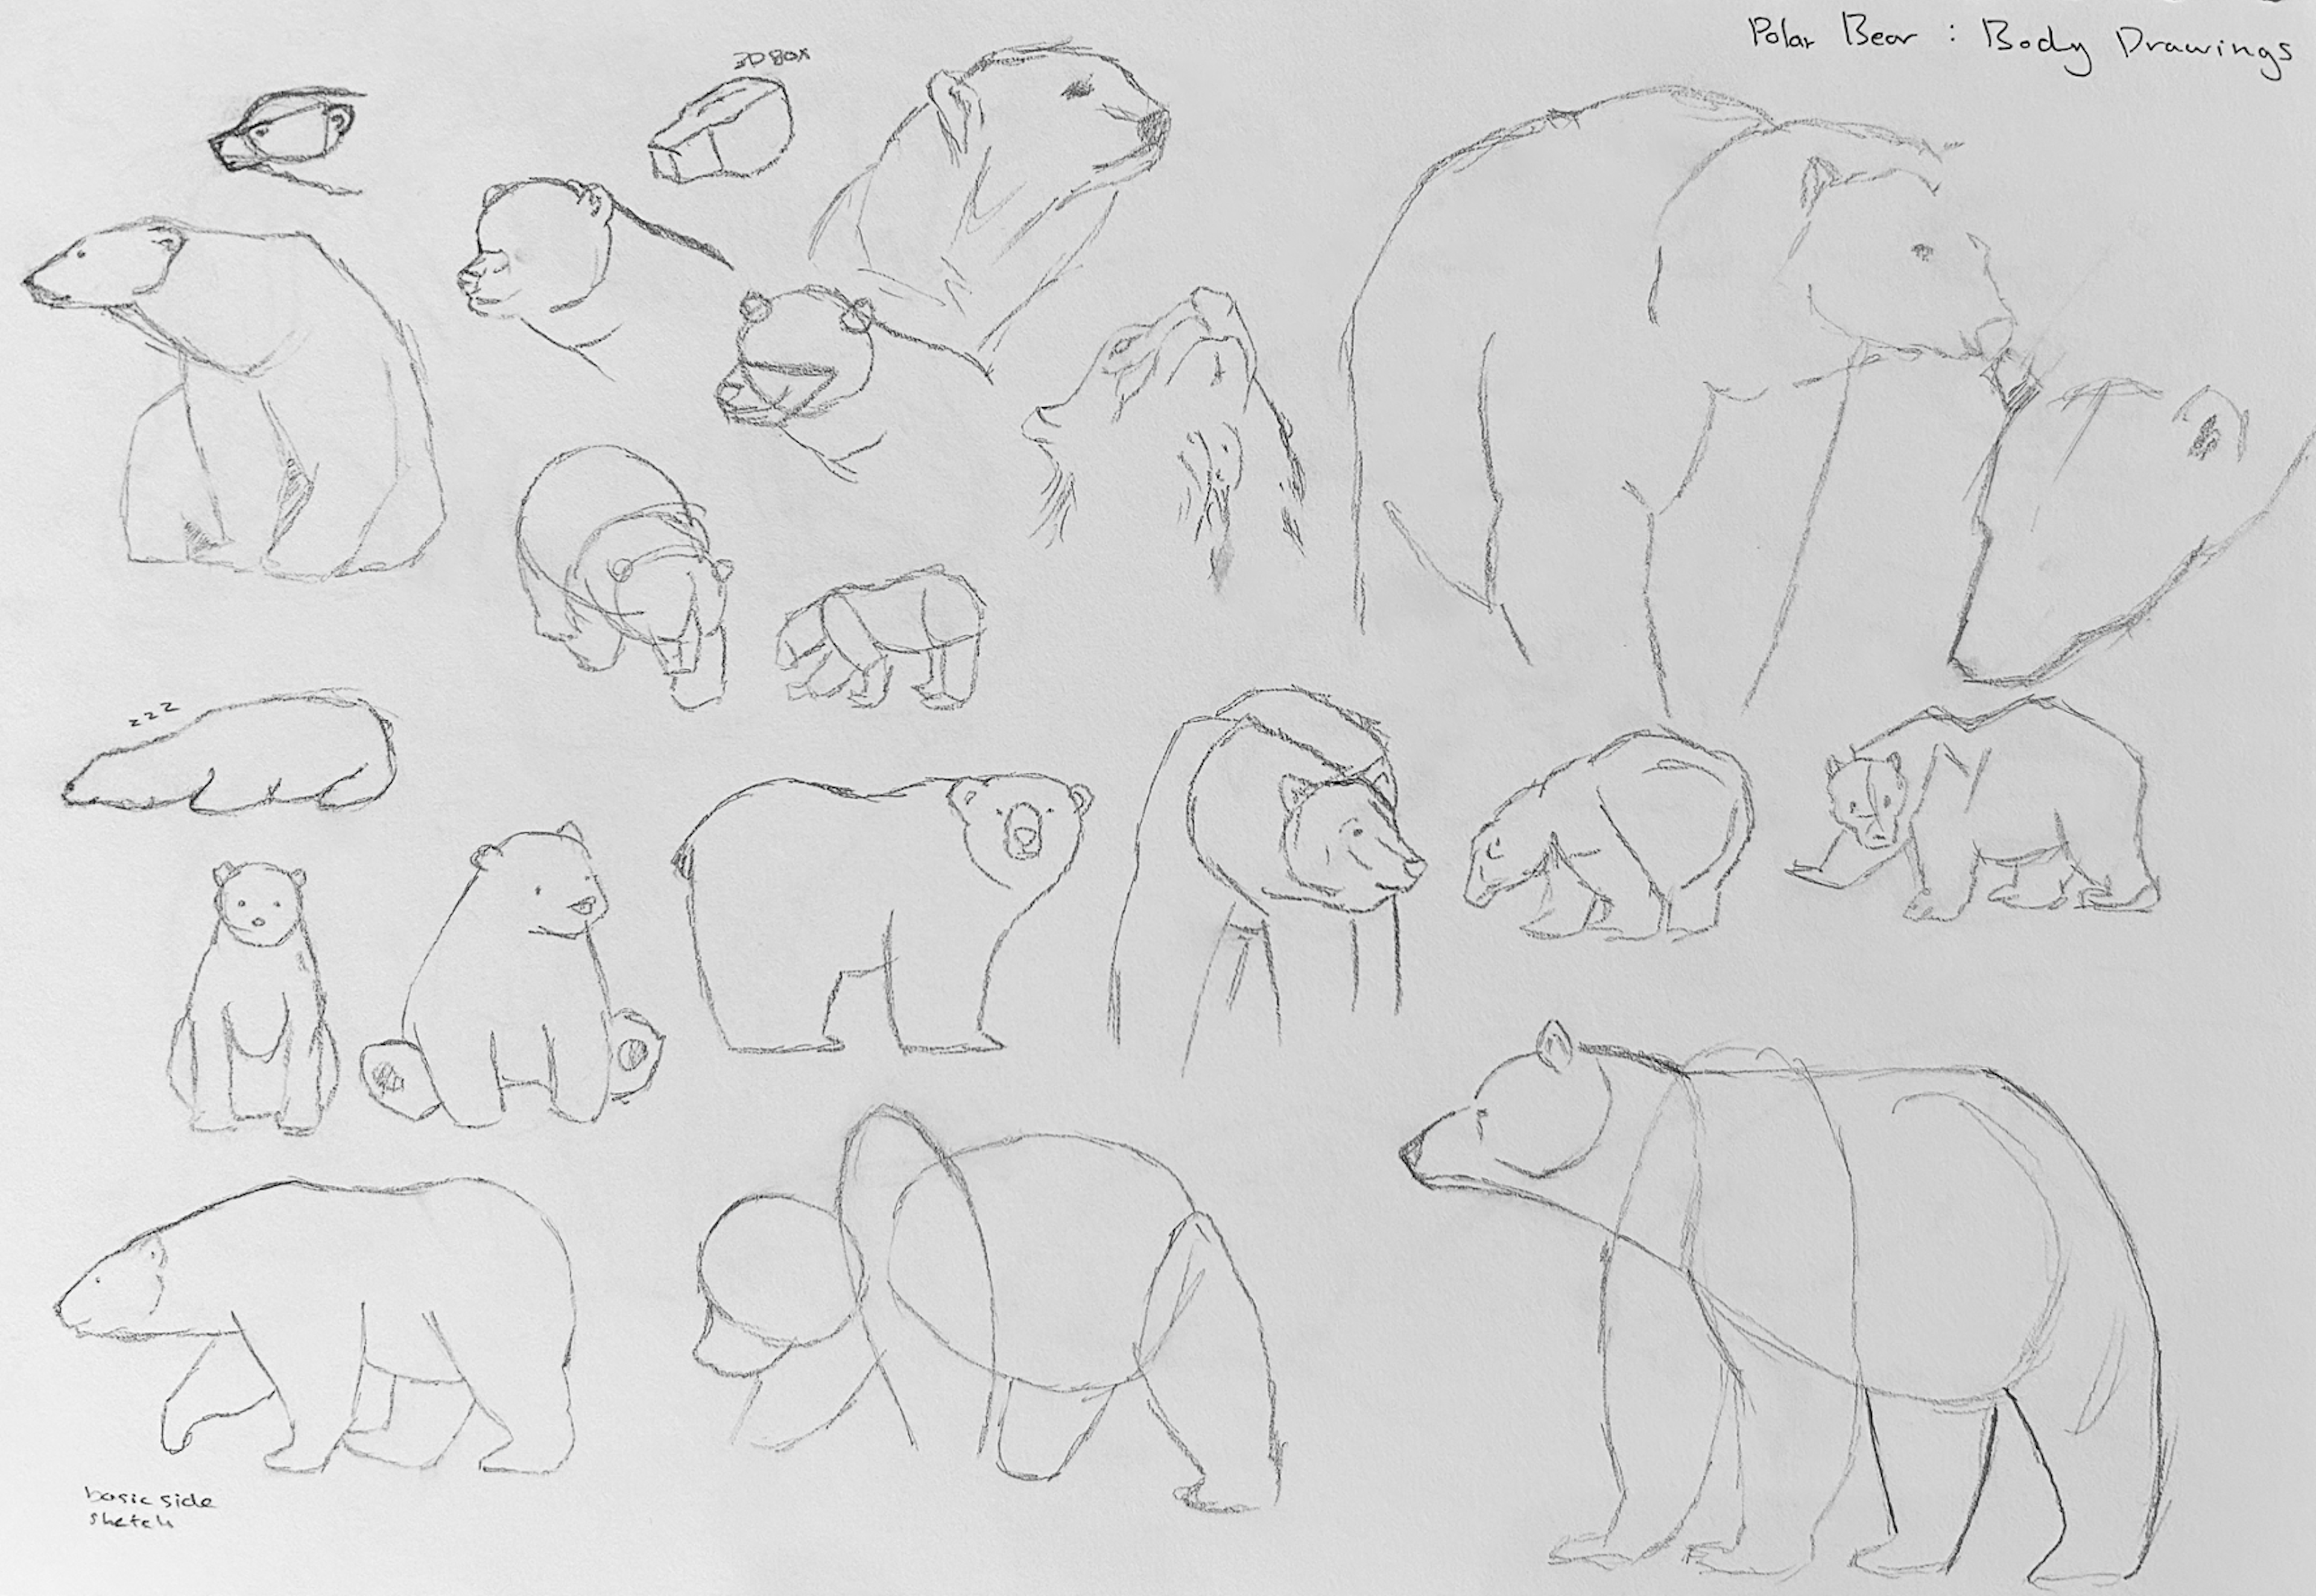 A series of intricate sketches capturing the essence and anatomy of polar bears, offering a detailed exploration of their form and movement. These anatomy studies helped me explore their shape, proportion and figure out if I wanted my hybrid’s body to be a similar shape and size.